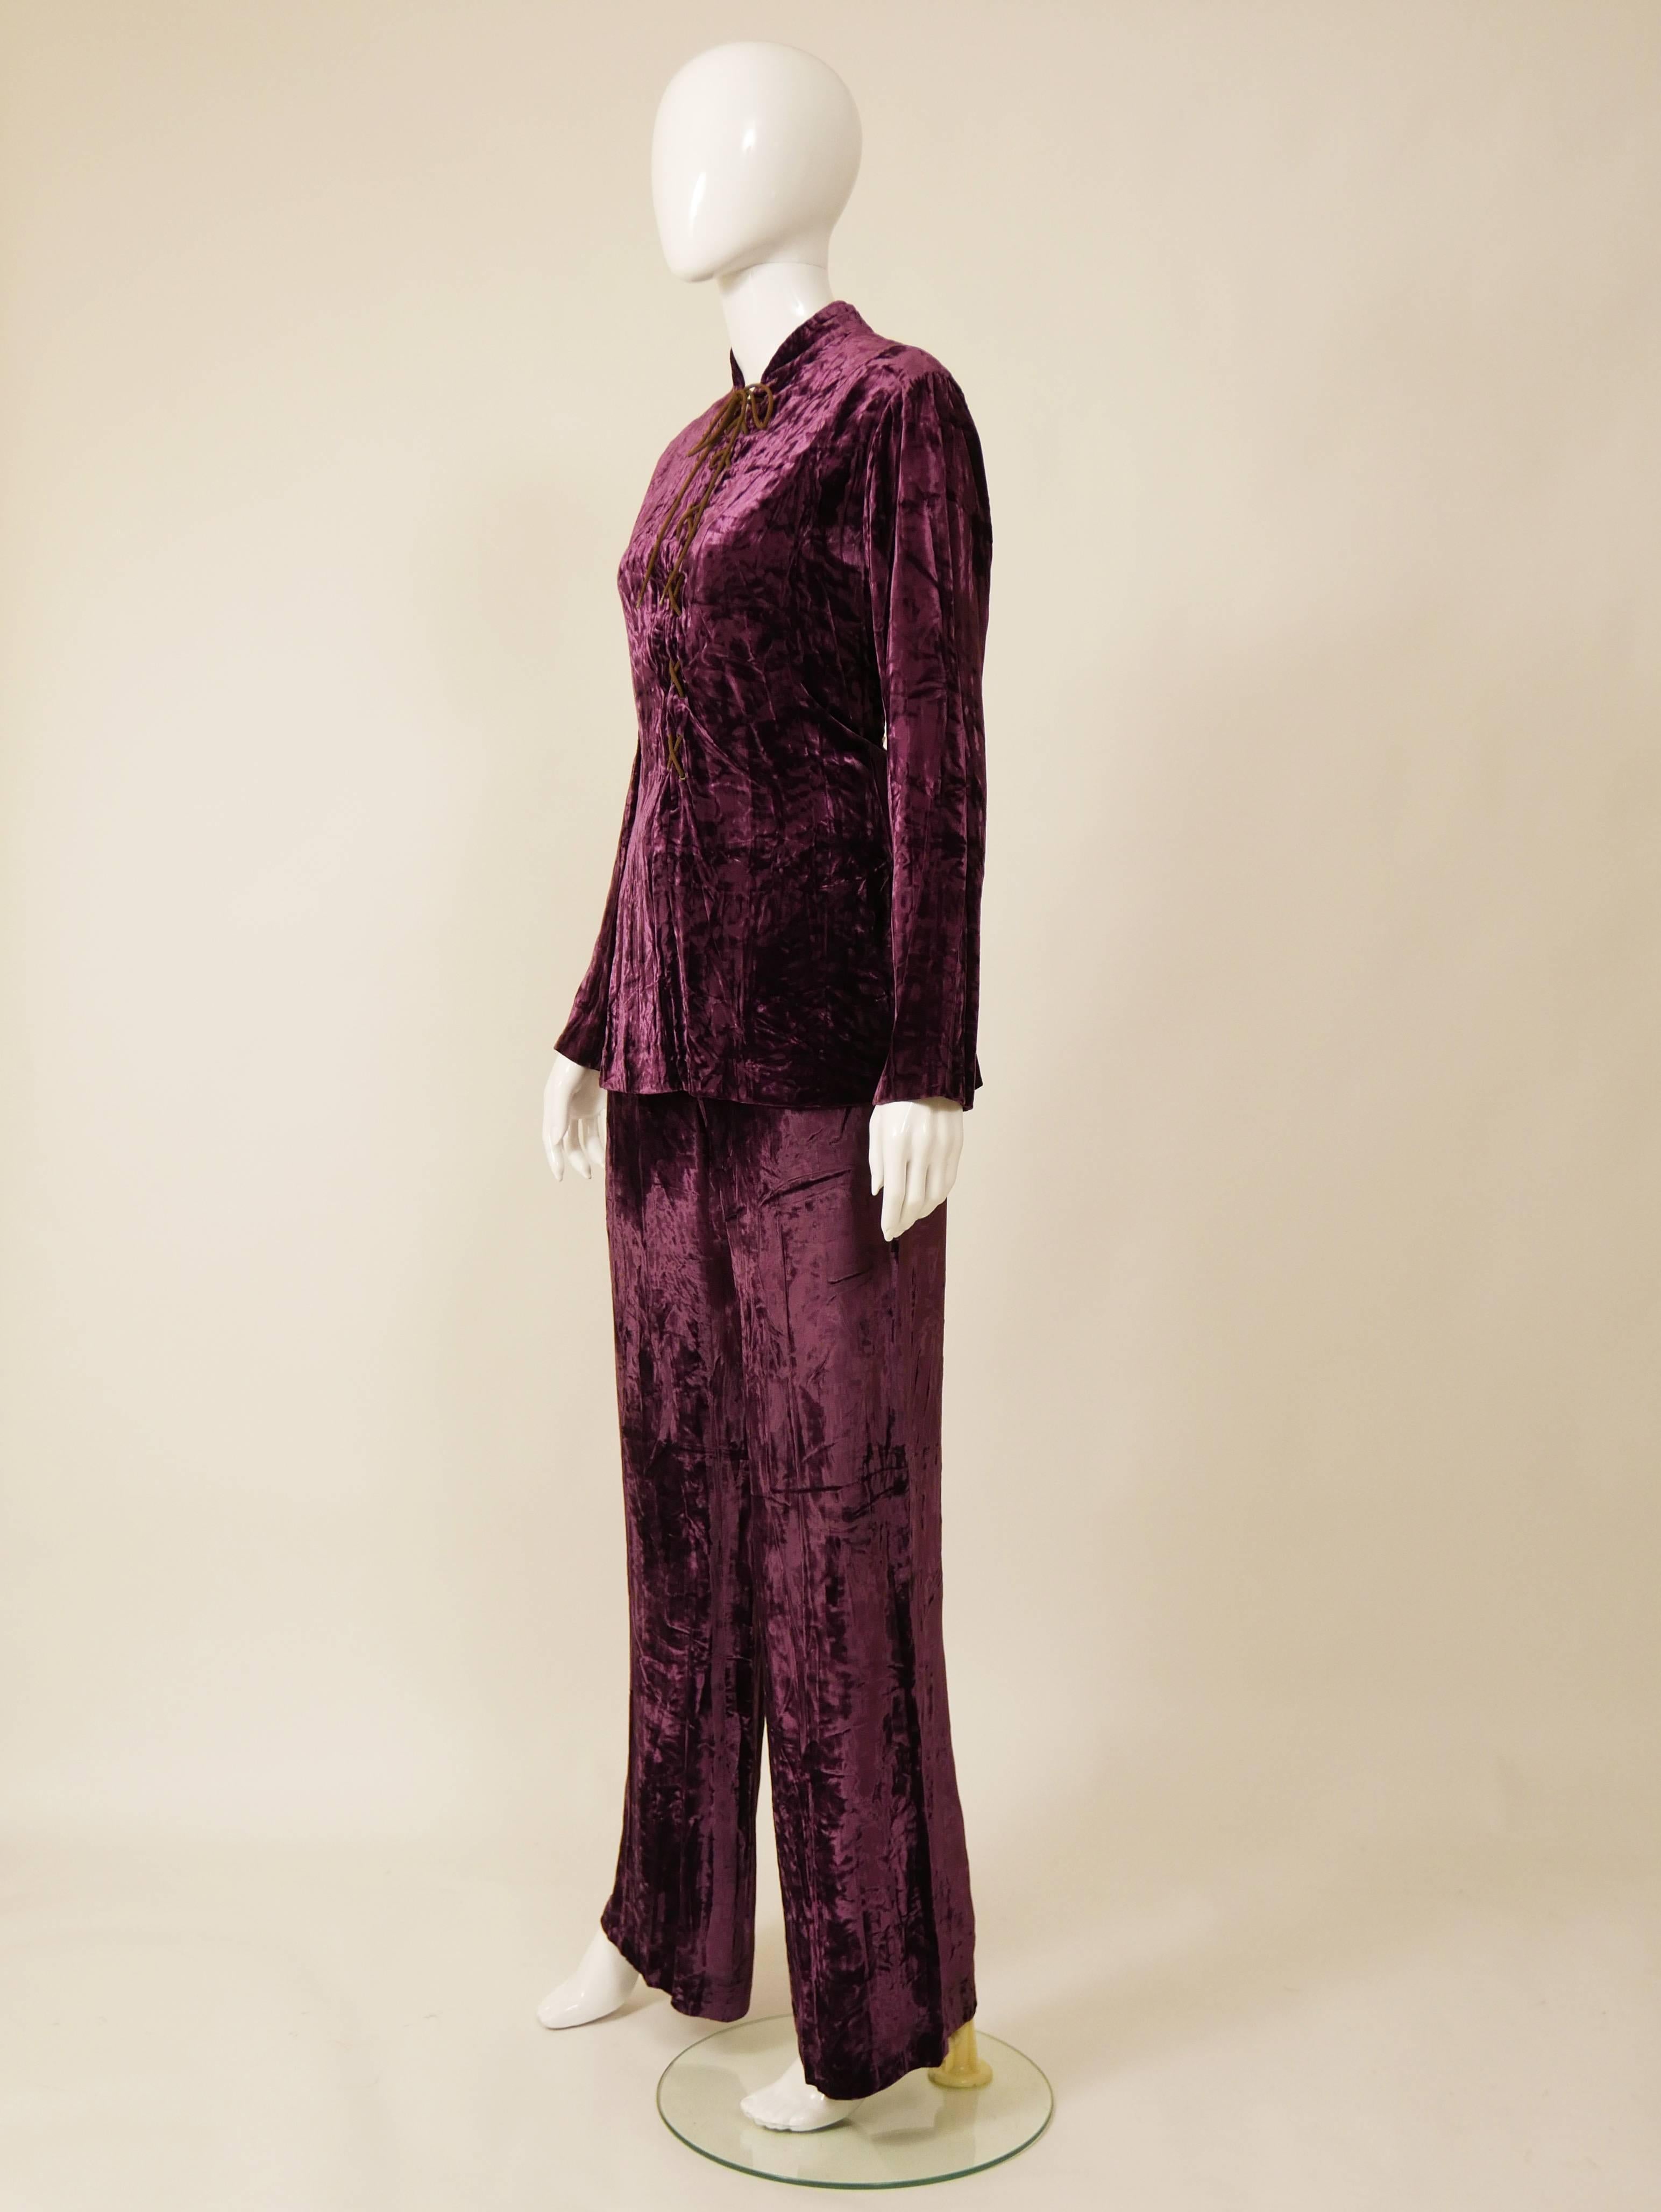 This amazing Saint Laurent 1970s 2 pc set is in a purple velvet silk fabric. The blouse shirt has lace tie closure. The pants has zip and hooks closure. It's fully lined.

Very good vintage condition 

Label: Saint Laurent Rive Gauche
Fabric: